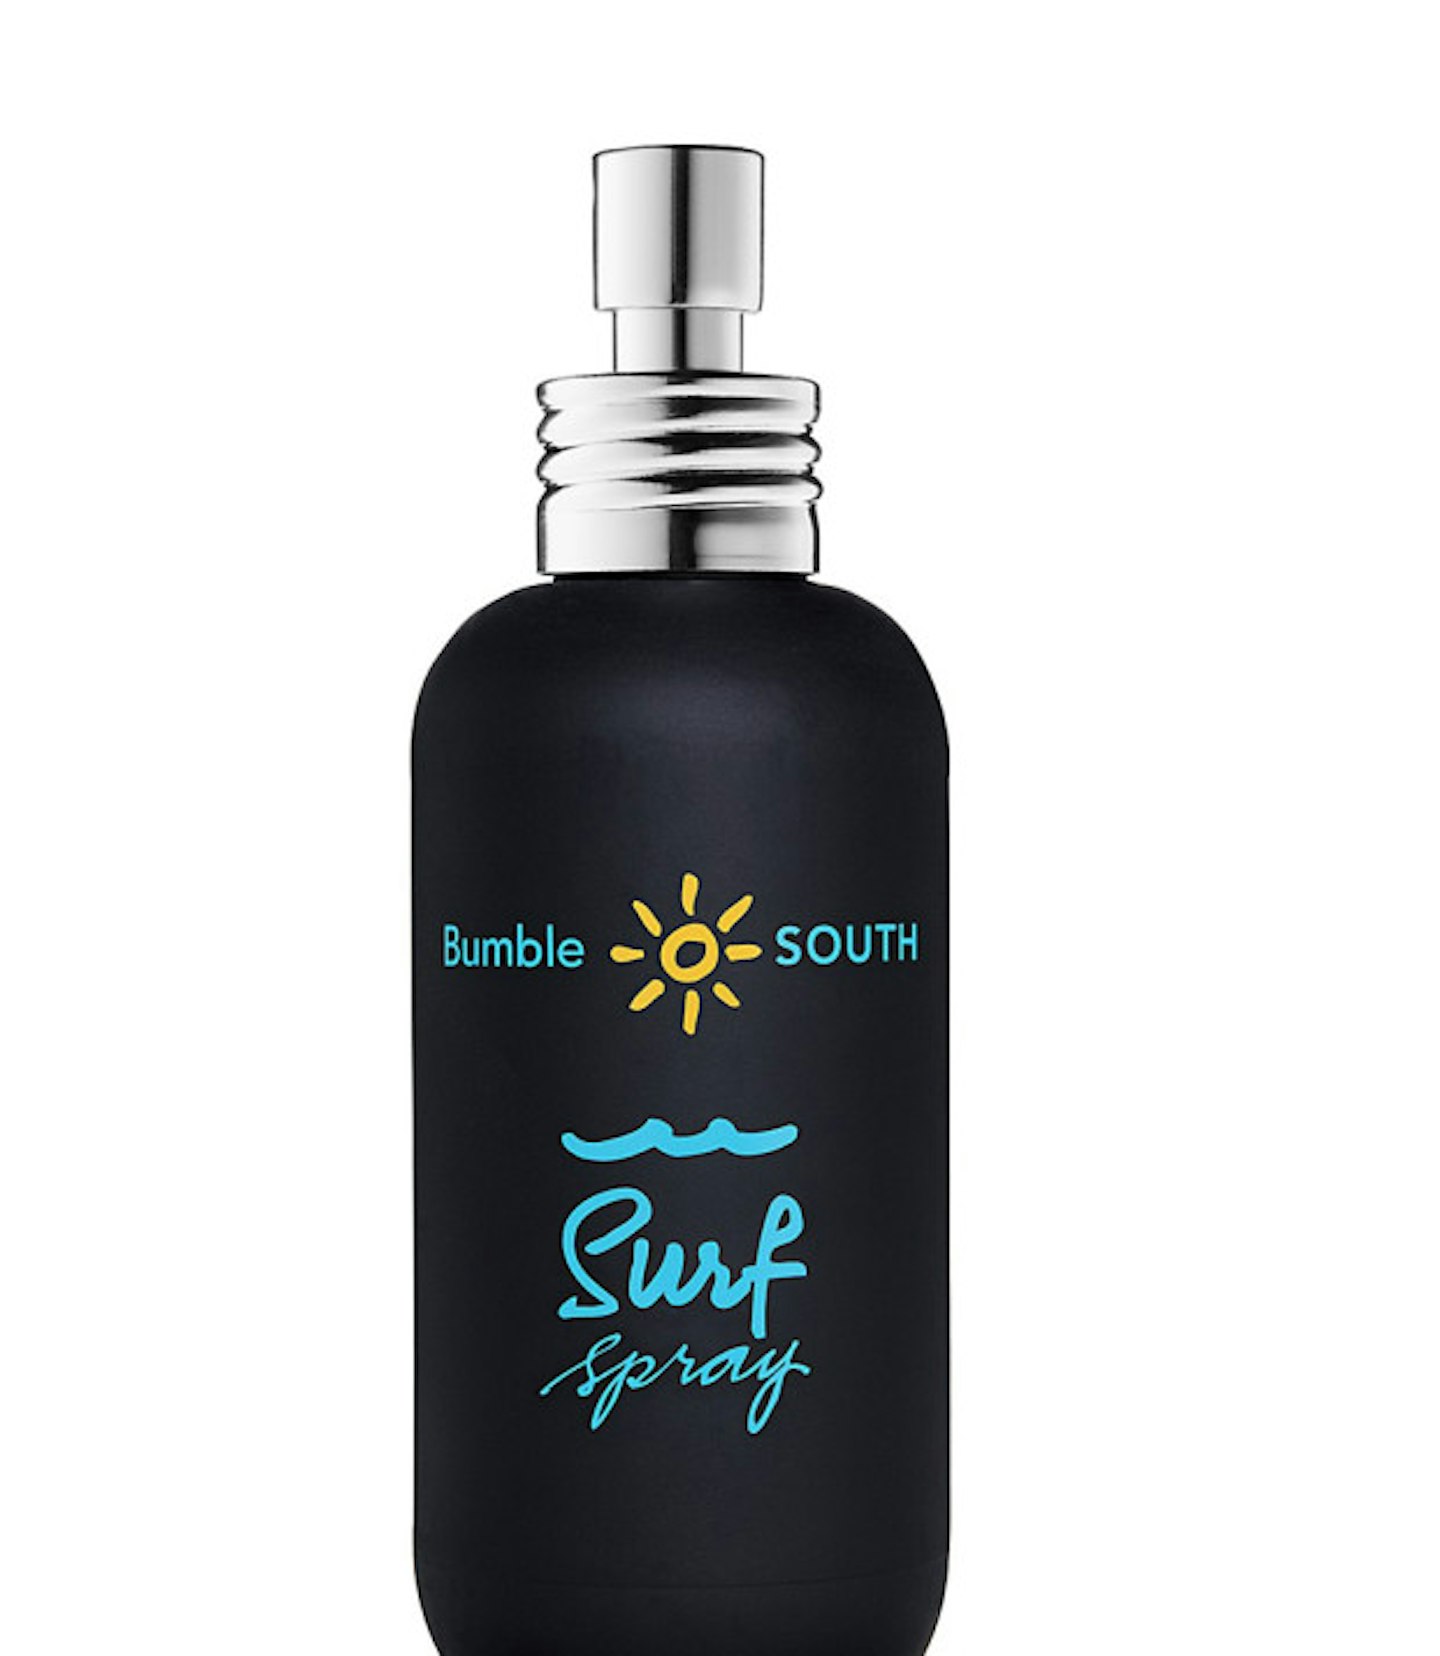 Mel uses this for body, we love it scrunched into damp hair for easy peasy tousled waves